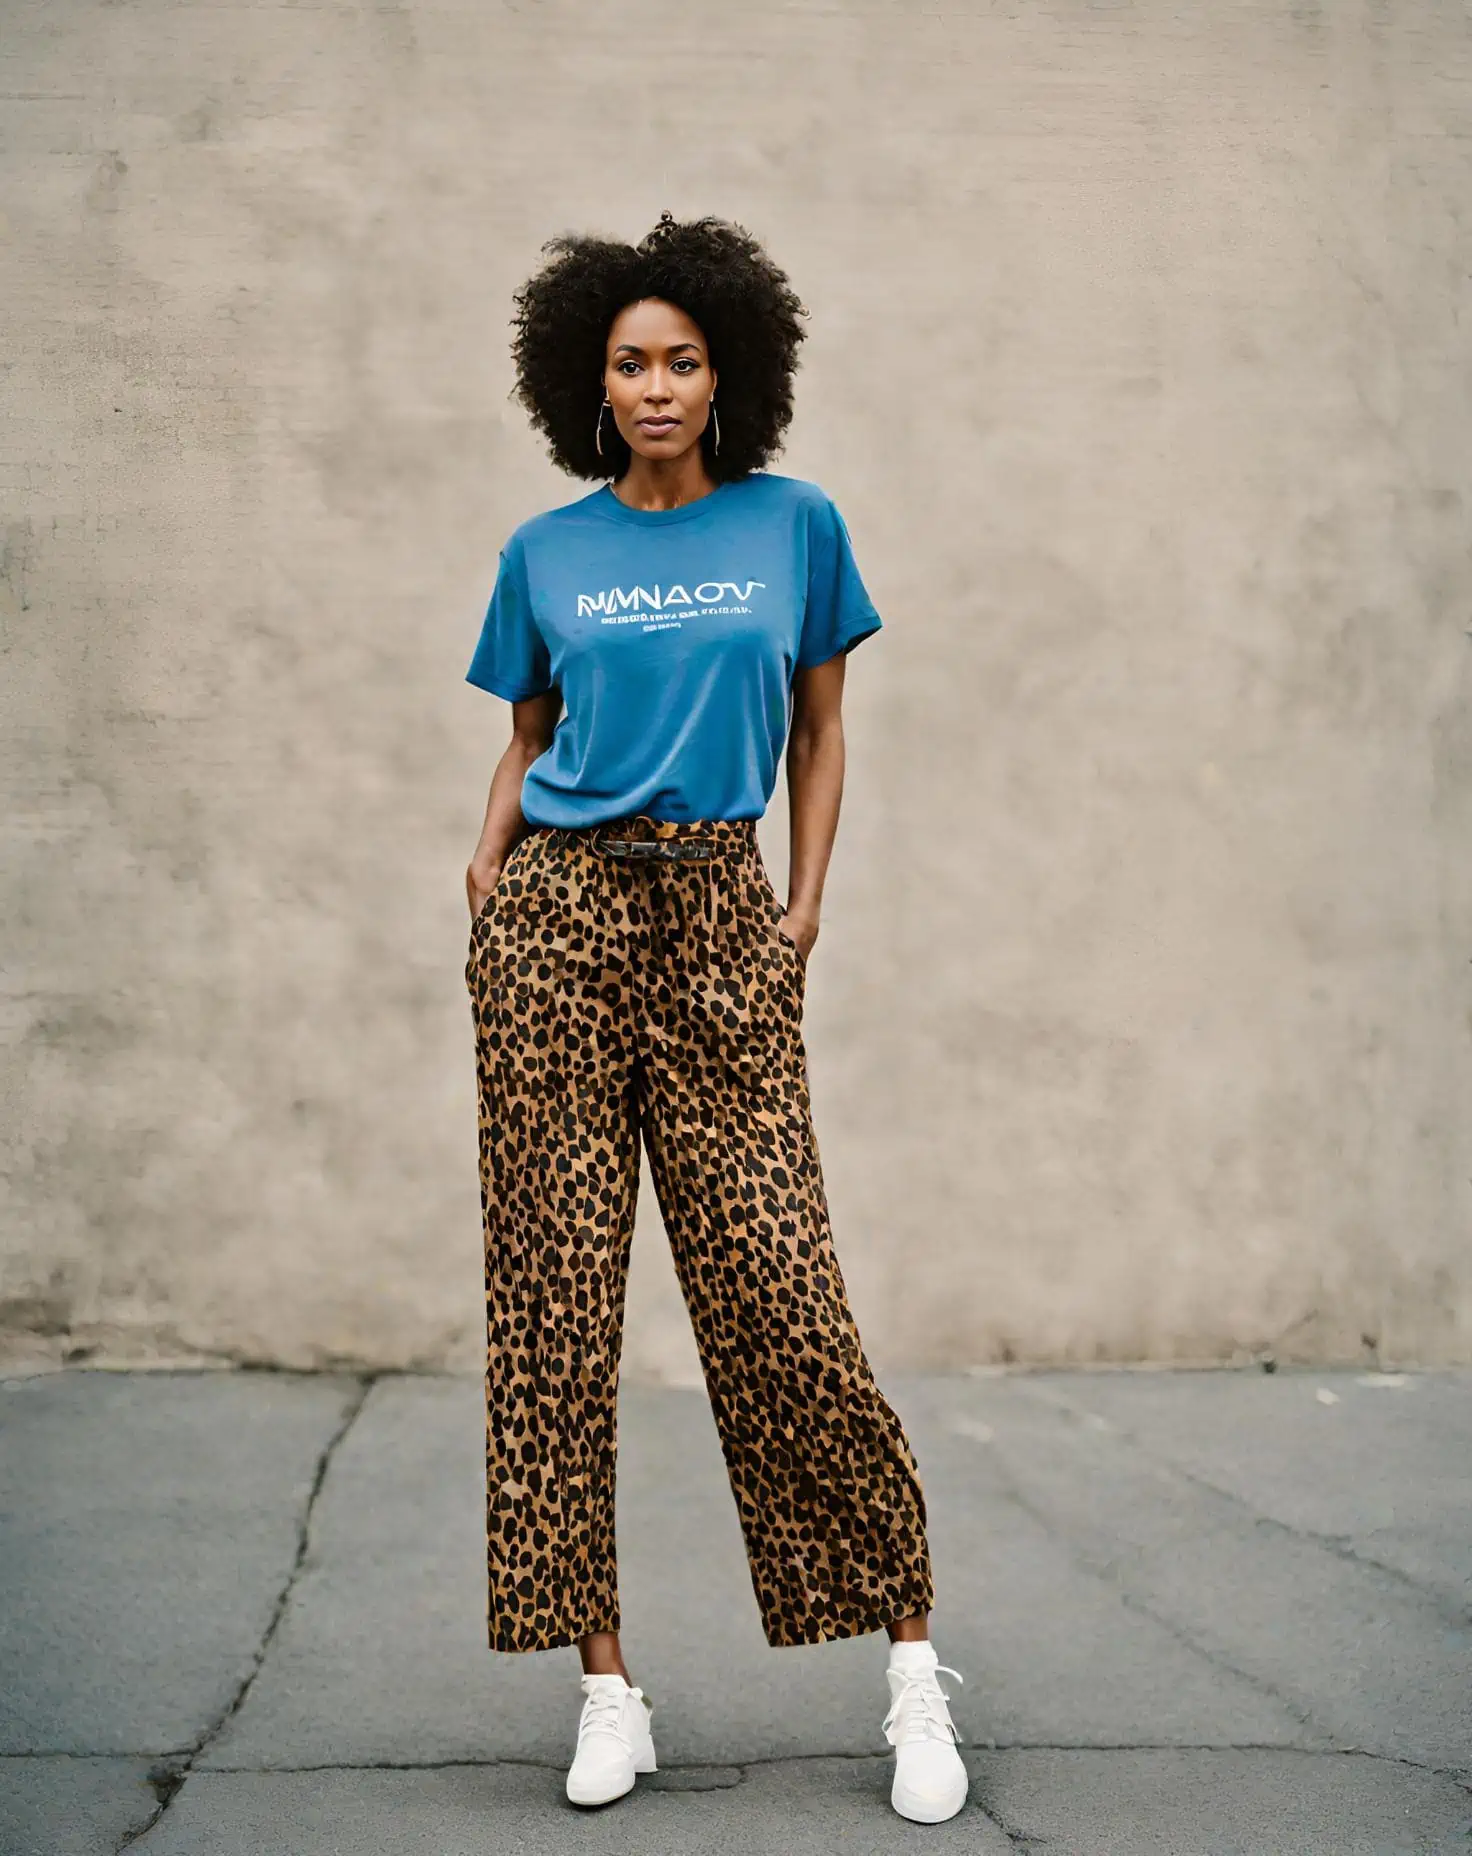 Wide Leg Relaxed Fit Pants - Leopard Print - Holley Day Australia